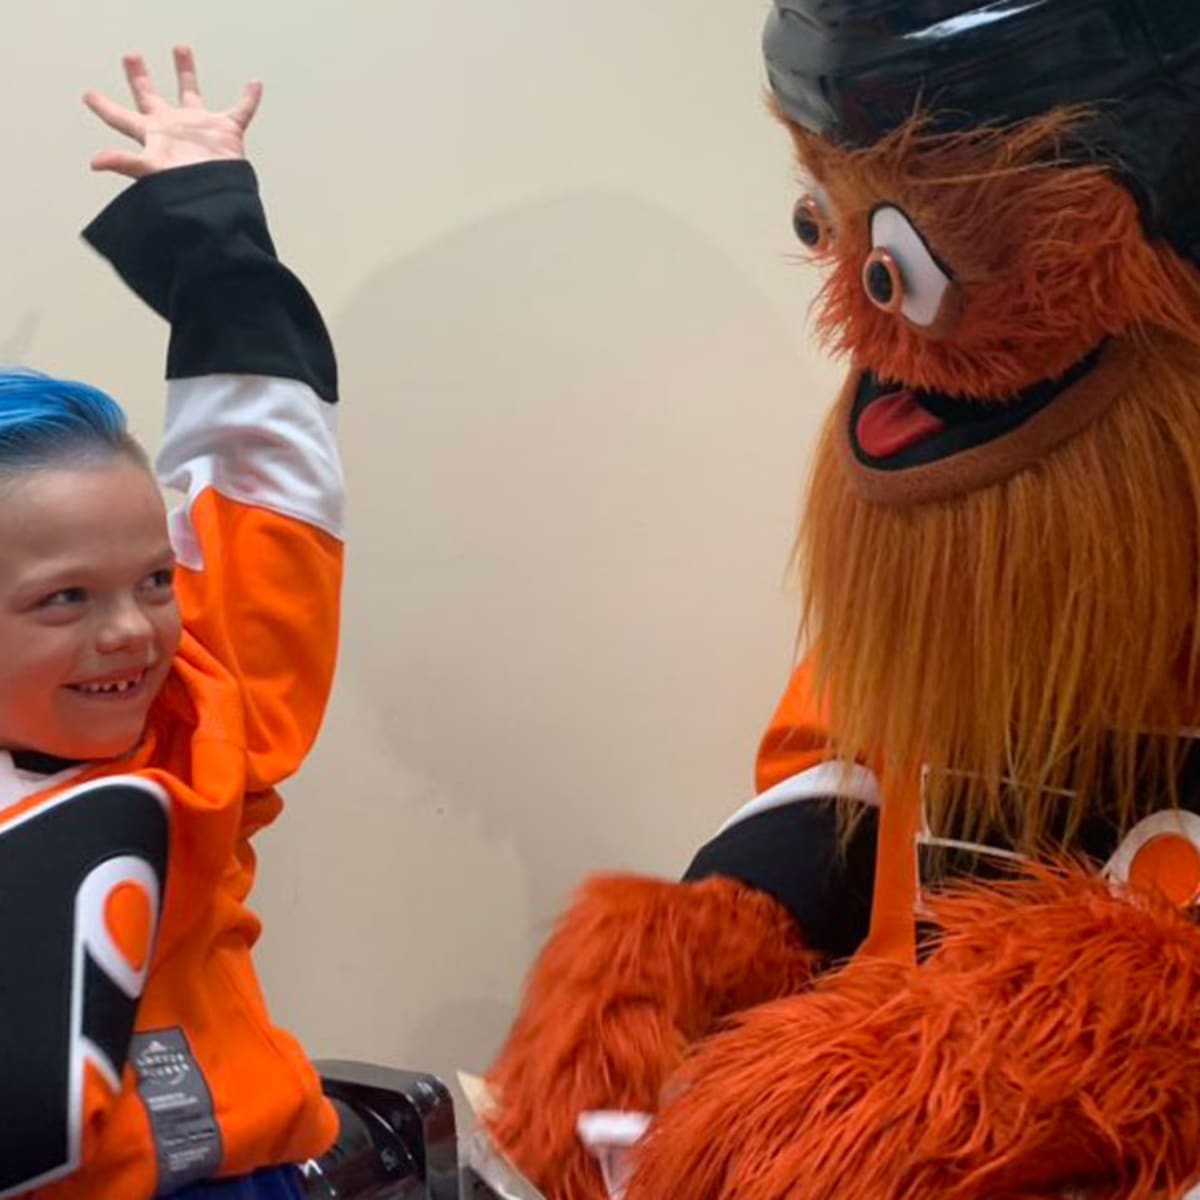 Philadelphia Flyers mascot surprises 7-year-old superfan who requested  custom Gritty-themed prosthetic